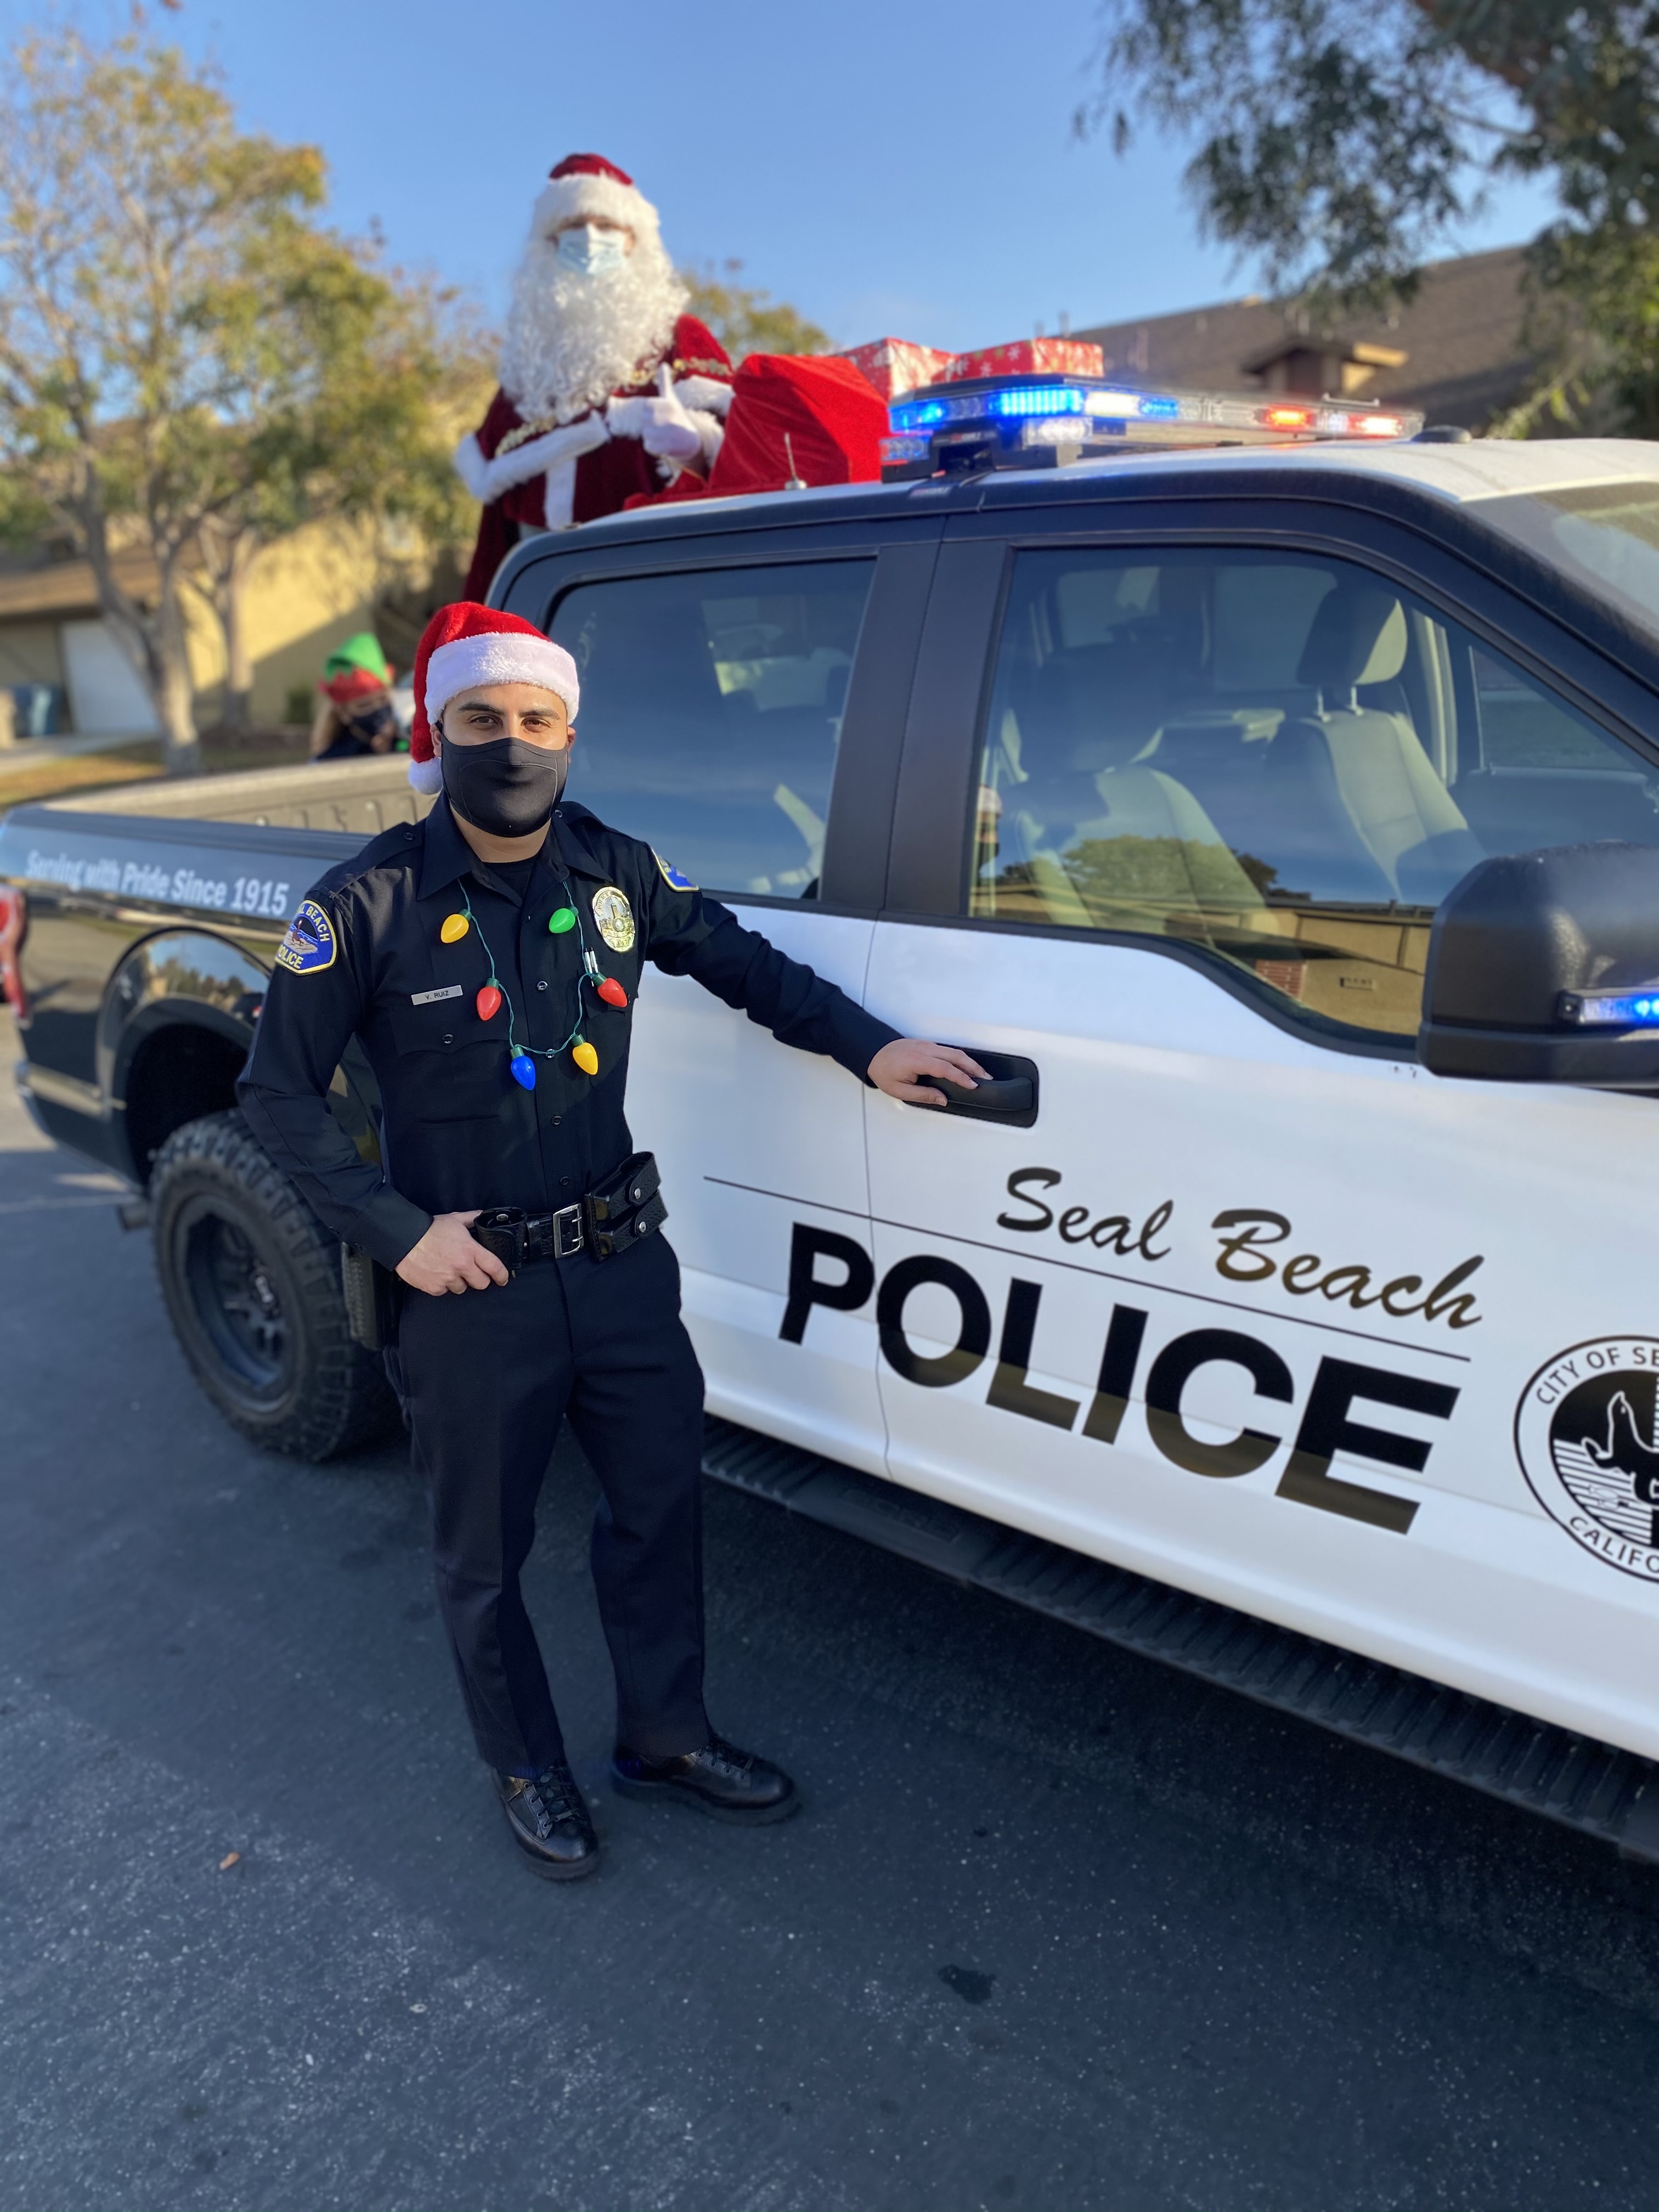 Seal Beach Police Officer and Santa Claus